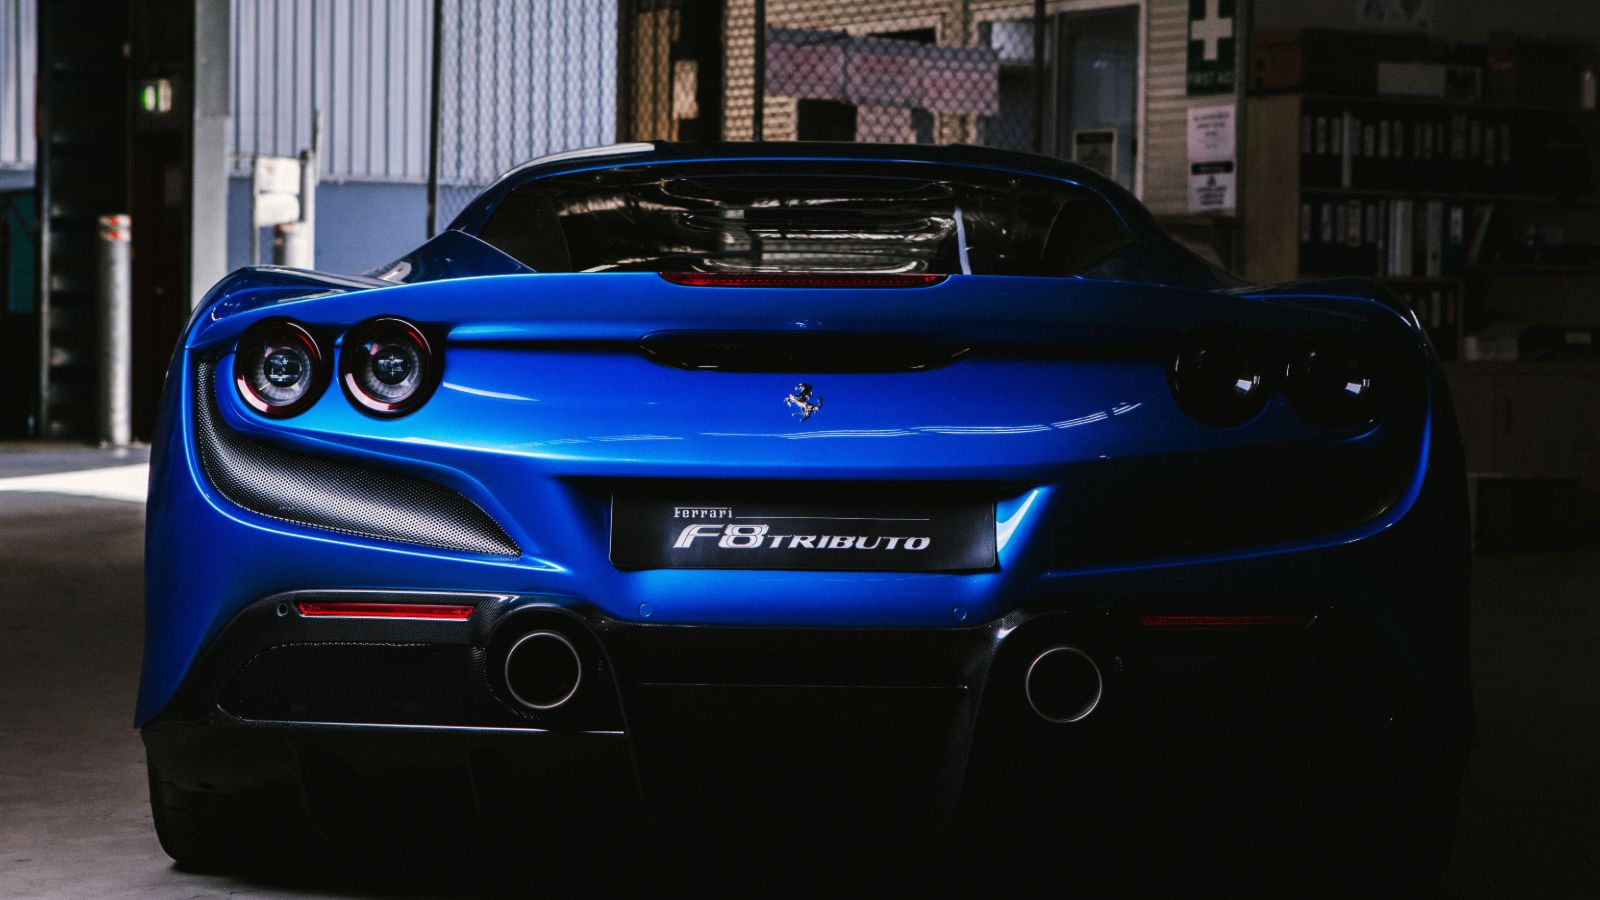 The All New Ferrari F8 Tributo Is Officially Here. Of Style